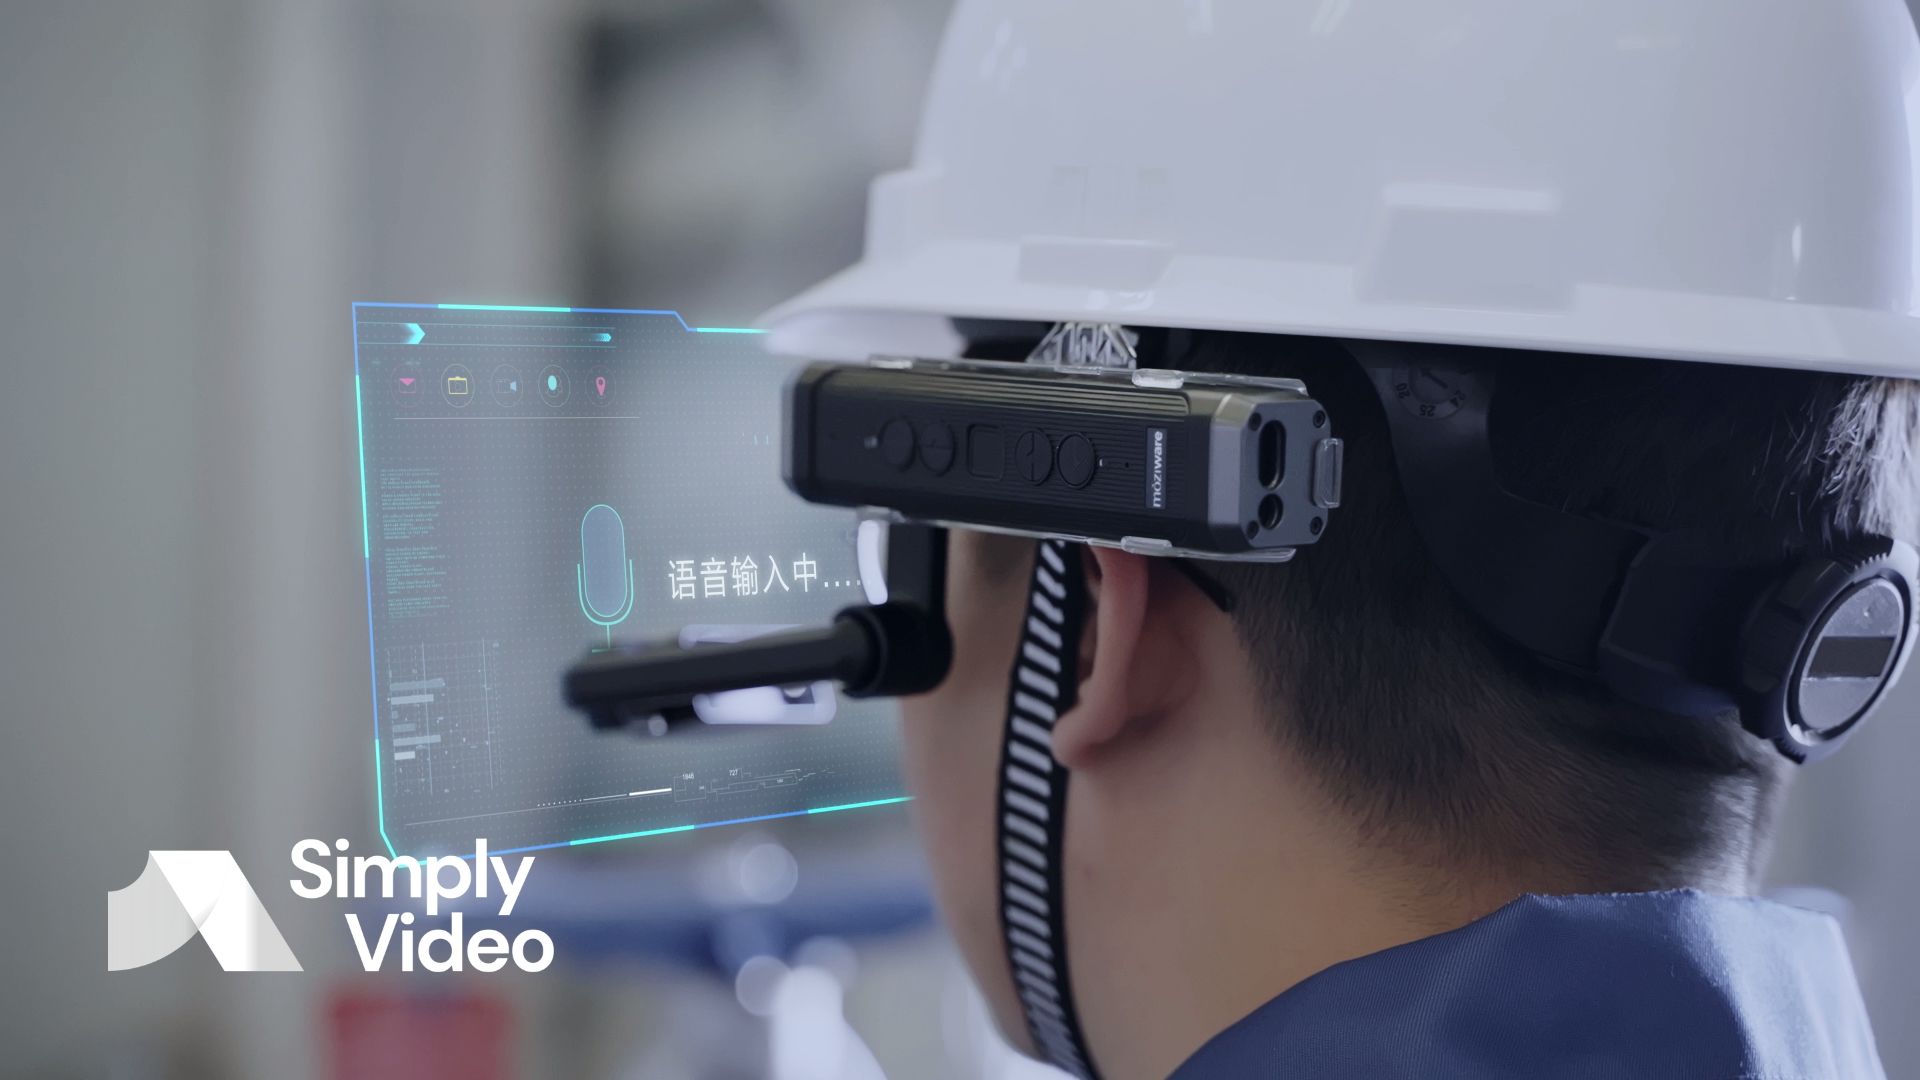 With SimplyVideo and the mōziware cimō, you can make expertise available to anyone, anywhere. Discover more in our detailed product report.